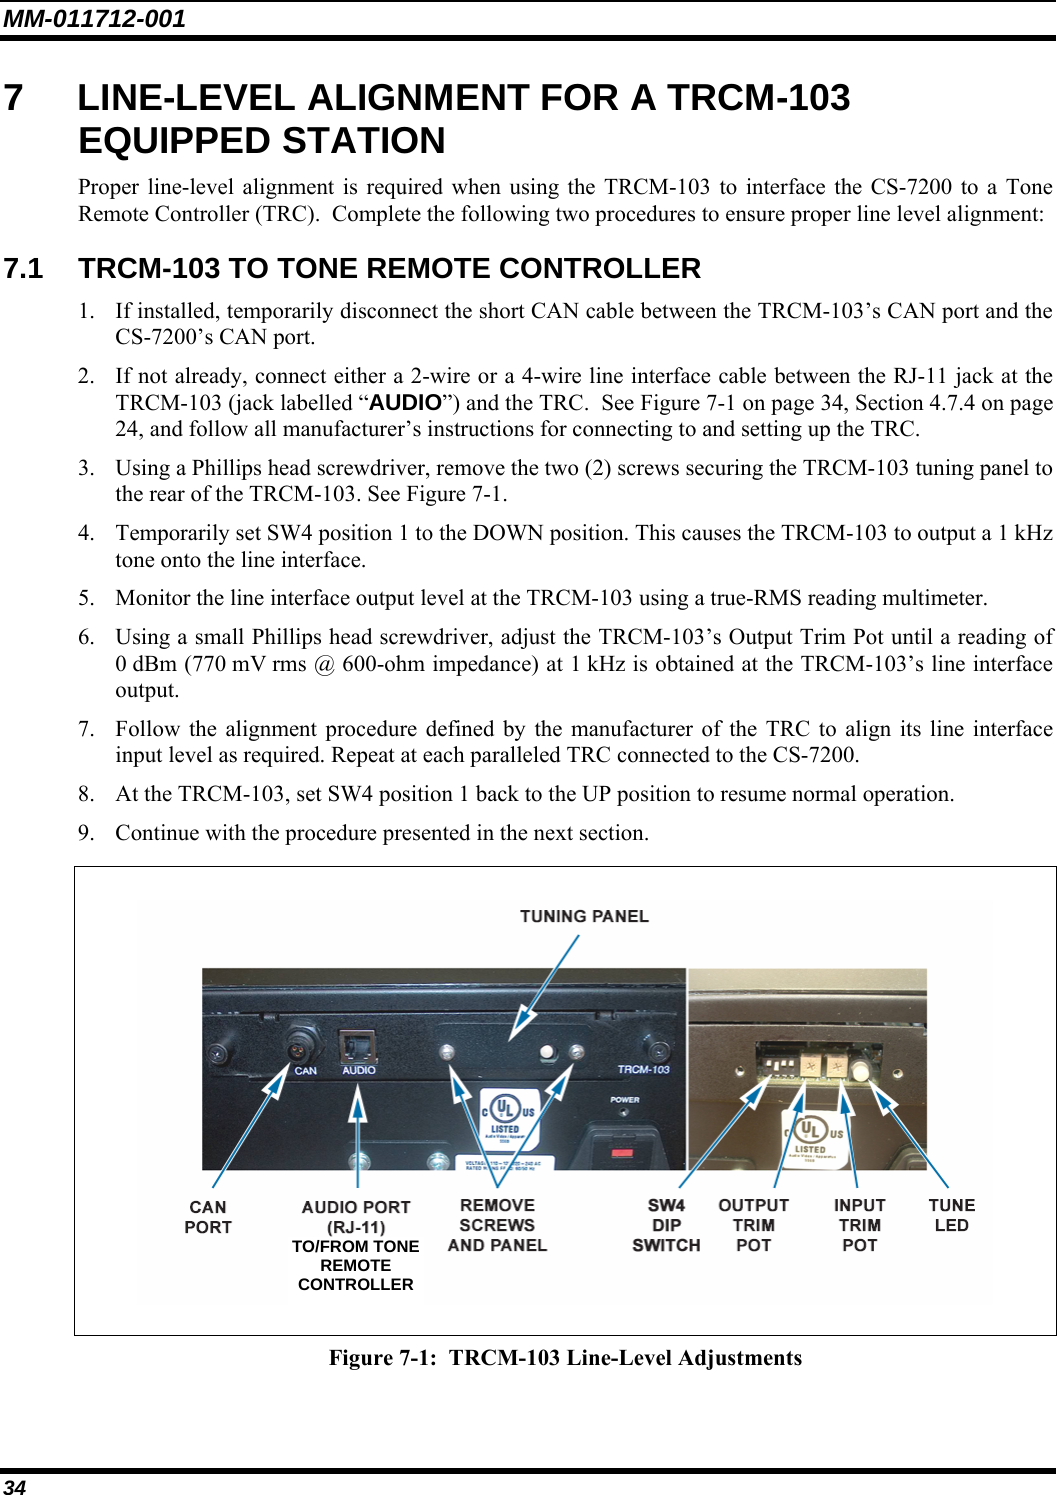 MM-011712-001 34 7  LINE-LEVEL ALIGNMENT FOR A TRCM-103 EQUIPPED STATION Proper line-level alignment is required when using the TRCM-103 to interface the CS-7200 to a Tone Remote Controller (TRC).  Complete the following two procedures to ensure proper line level alignment: 7.1  TRCM-103 TO TONE REMOTE CONTROLLER 1. If installed, temporarily disconnect the short CAN cable between the TRCM-103’s CAN port and the CS-7200’s CAN port. 2. If not already, connect either a 2-wire or a 4-wire line interface cable between the RJ-11 jack at the TRCM-103 (jack labelled “AUDIO”) and the TRC.  See Figure 7-1 on page 34, Section 4.7.4 on page 24, and follow all manufacturer’s instructions for connecting to and setting up the TRC. 3. Using a Phillips head screwdriver, remove the two (2) screws securing the TRCM-103 tuning panel to the rear of the TRCM-103. See Figure 7-1. 4. Temporarily set SW4 position 1 to the DOWN position. This causes the TRCM-103 to output a 1 kHz tone onto the line interface. 5. Monitor the line interface output level at the TRCM-103 using a true-RMS reading multimeter. 6. Using a small Phillips head screwdriver, adjust the TRCM-103’s Output Trim Pot until a reading of 0 dBm (770 mV rms @ 600-ohm impedance) at 1 kHz is obtained at the TRCM-103’s line interface output. 7. Follow the alignment procedure defined by the manufacturer of the TRC to align its line interface input level as required. Repeat at each paralleled TRC connected to the CS-7200. 8. At the TRCM-103, set SW4 position 1 back to the UP position to resume normal operation. 9. Continue with the procedure presented in the next section.   Figure 7-1:  TRCM-103 Line-Level Adjustments  TO/FROM TONE REMOTE CONTROLLER 